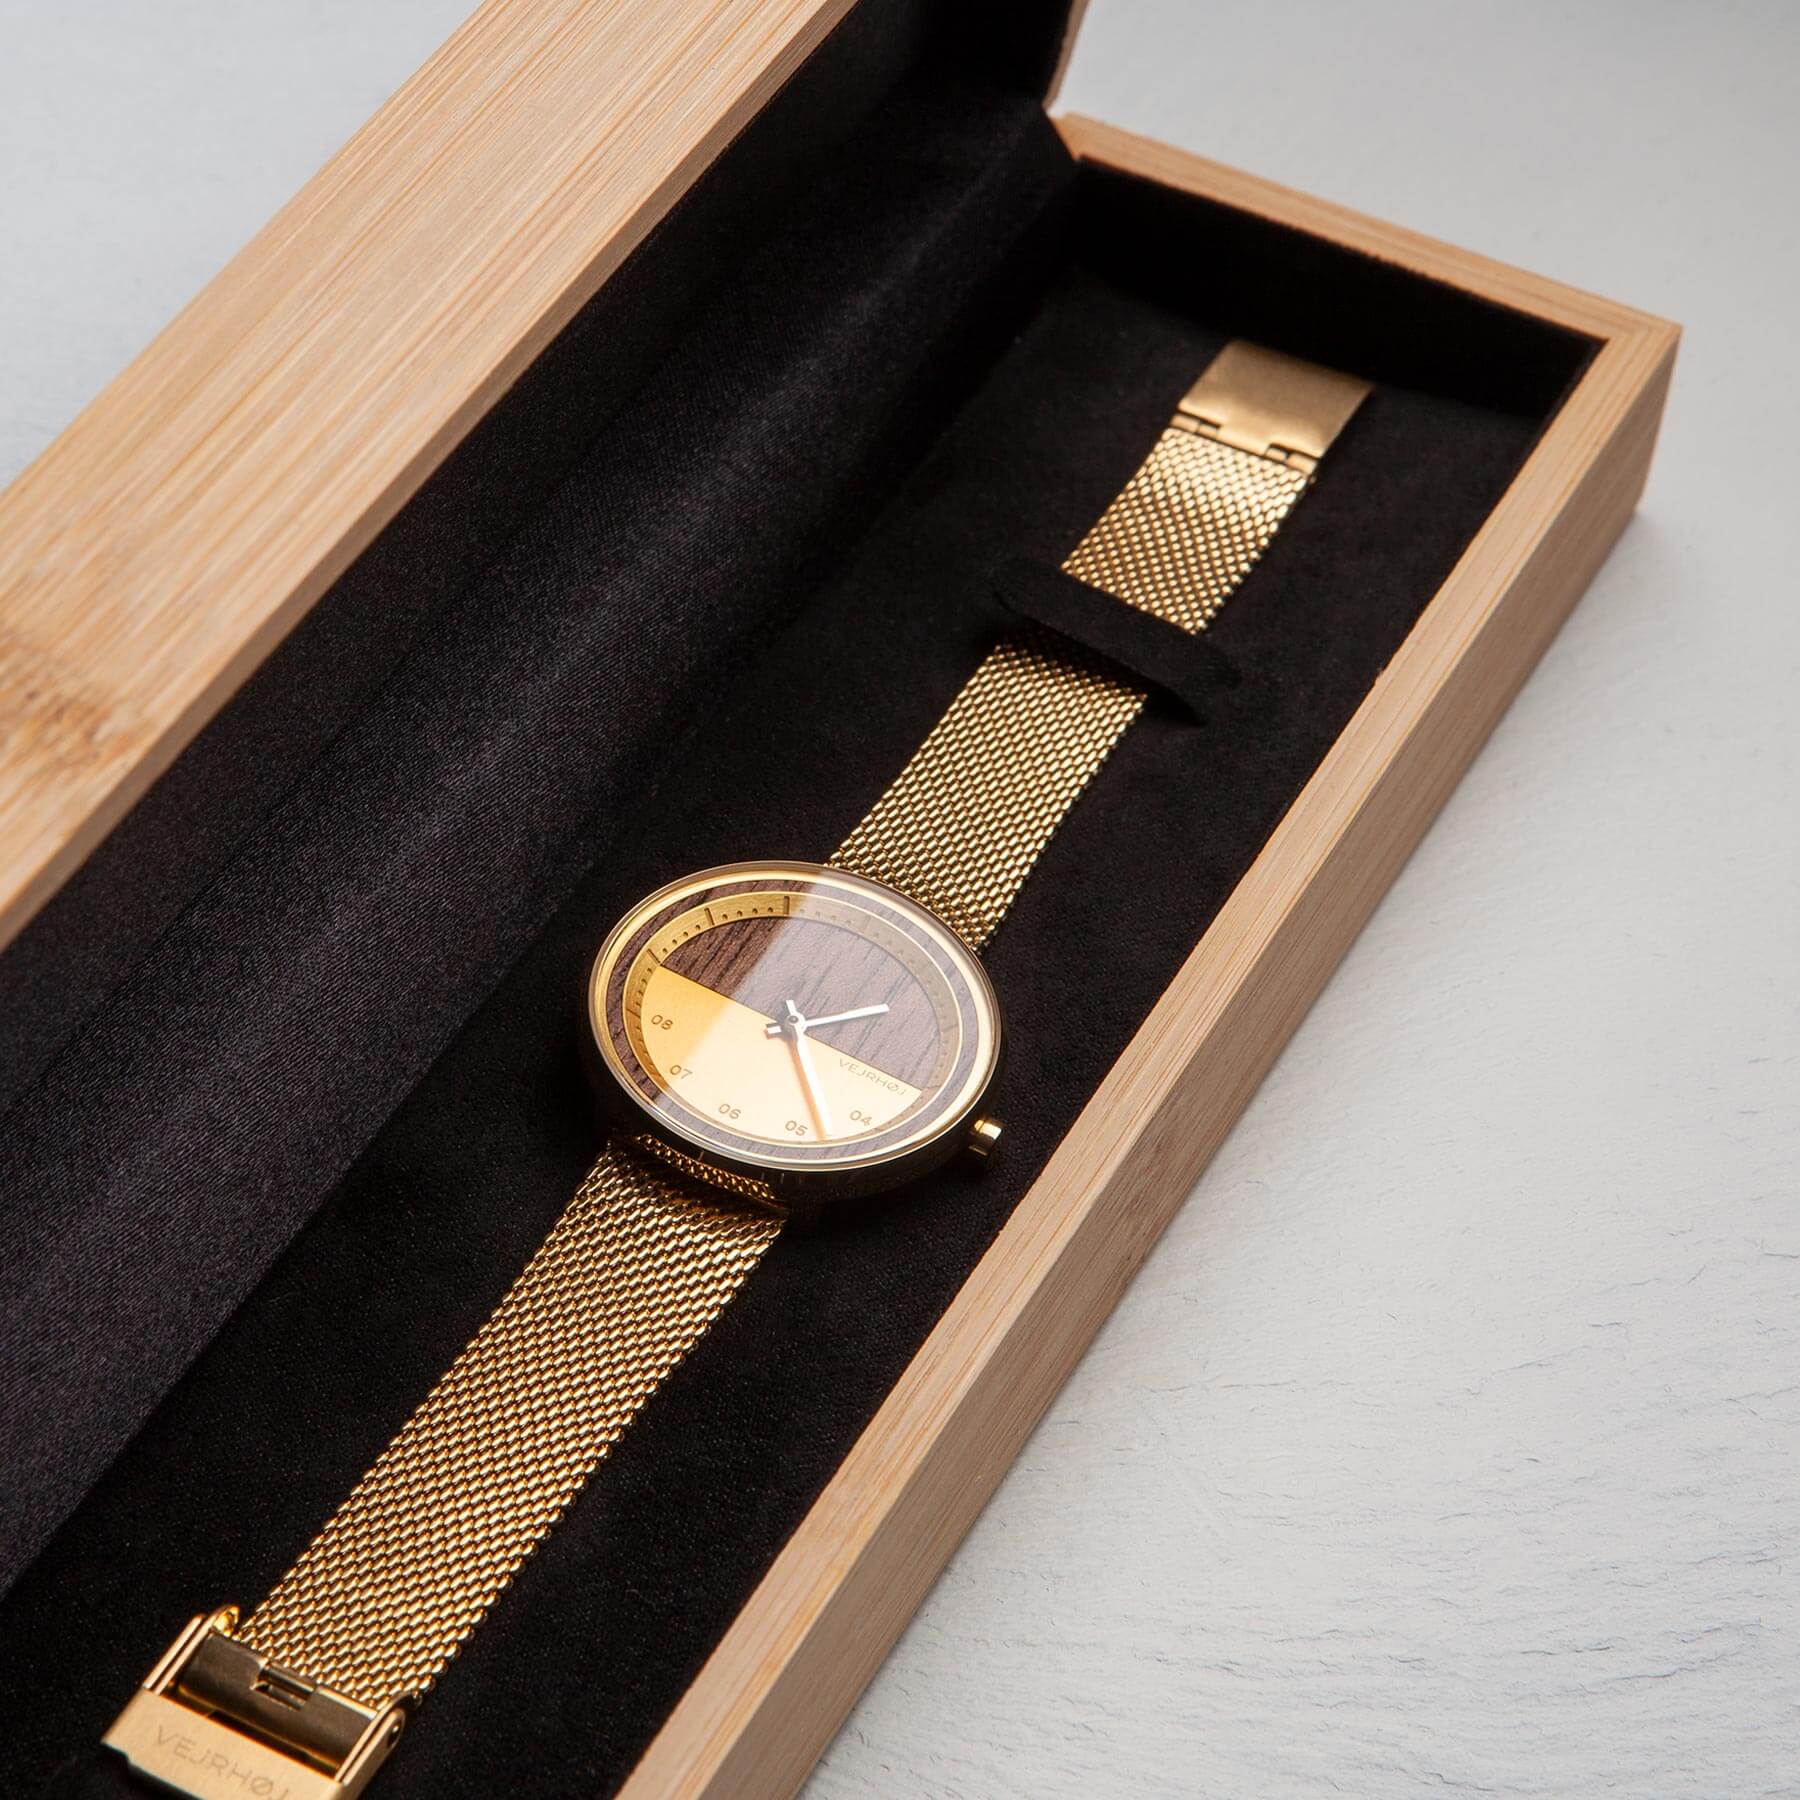 wood watch with golden finish in a wooden box